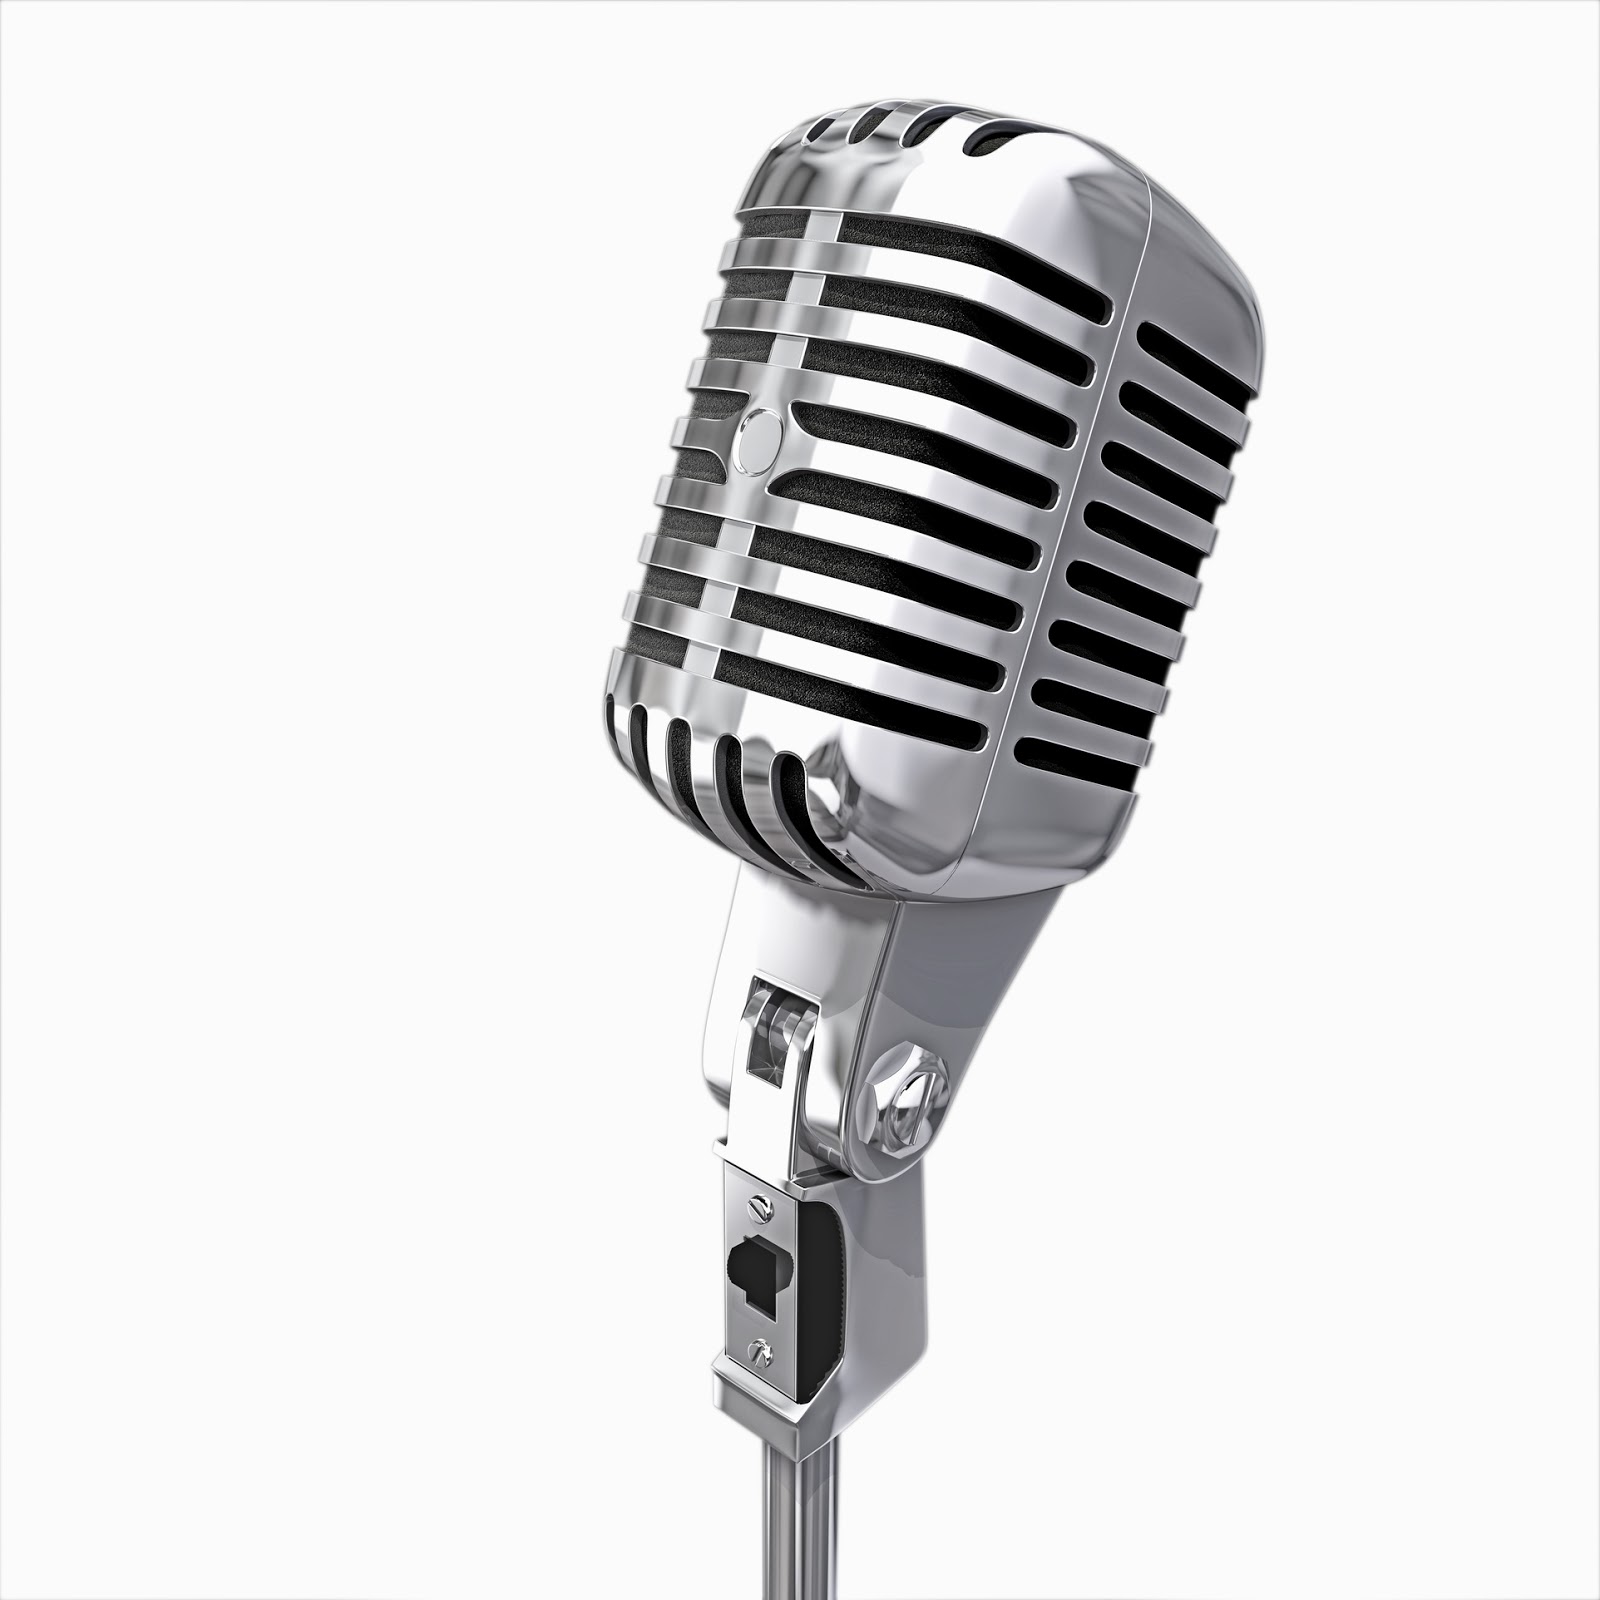 Radio Microphone Png   Clipart Panda   Free Clipart Images